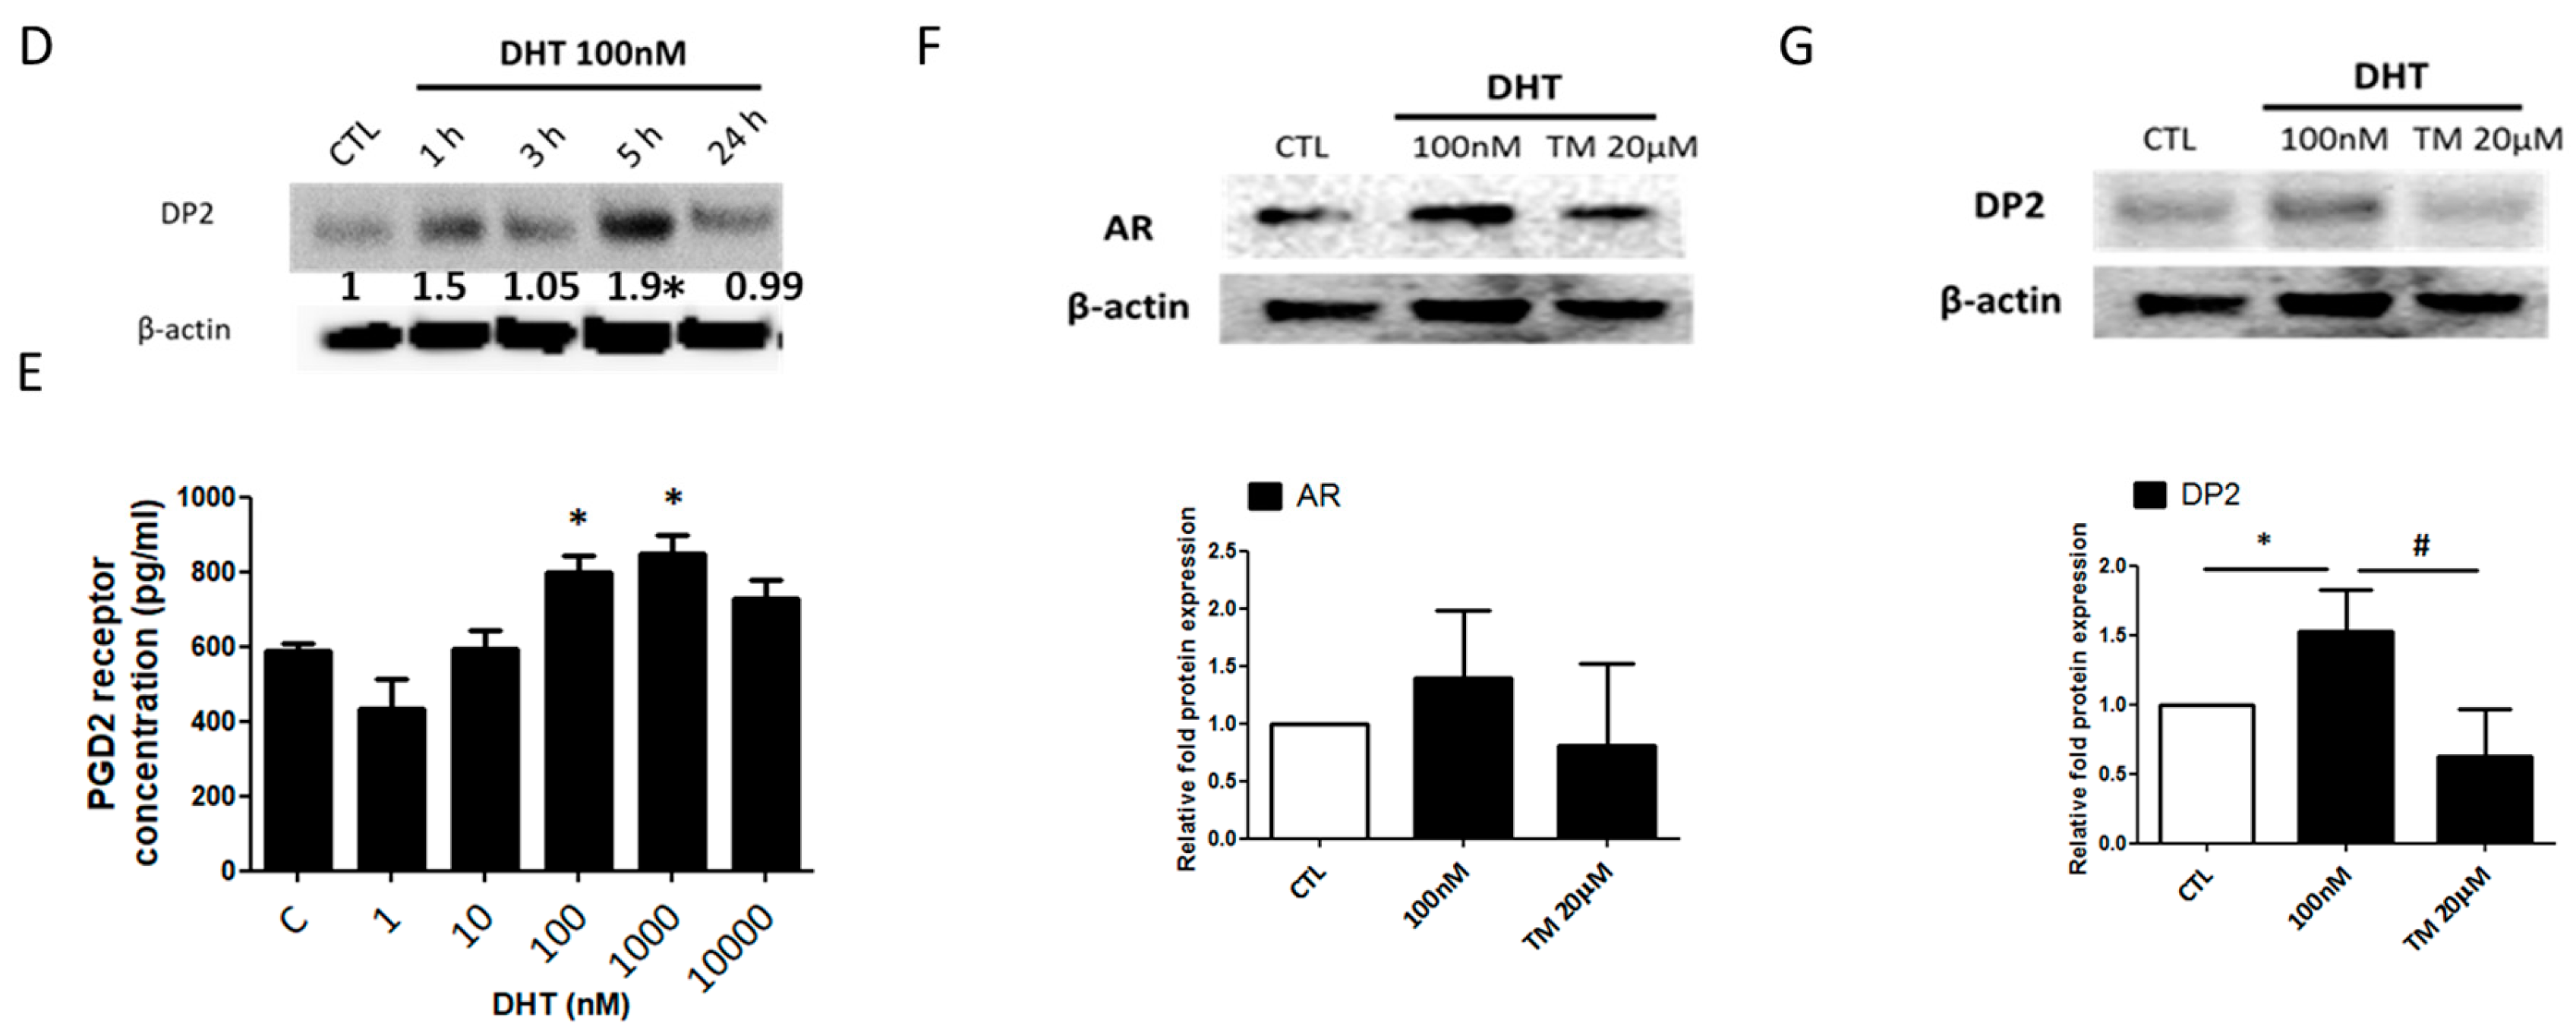 IJMS | Free Full-Text | Prostaglandin D2-Mediated DP2 and AKT Signal  Regulate the Activation of Androgen Receptors in Human Dermal Papilla Cells